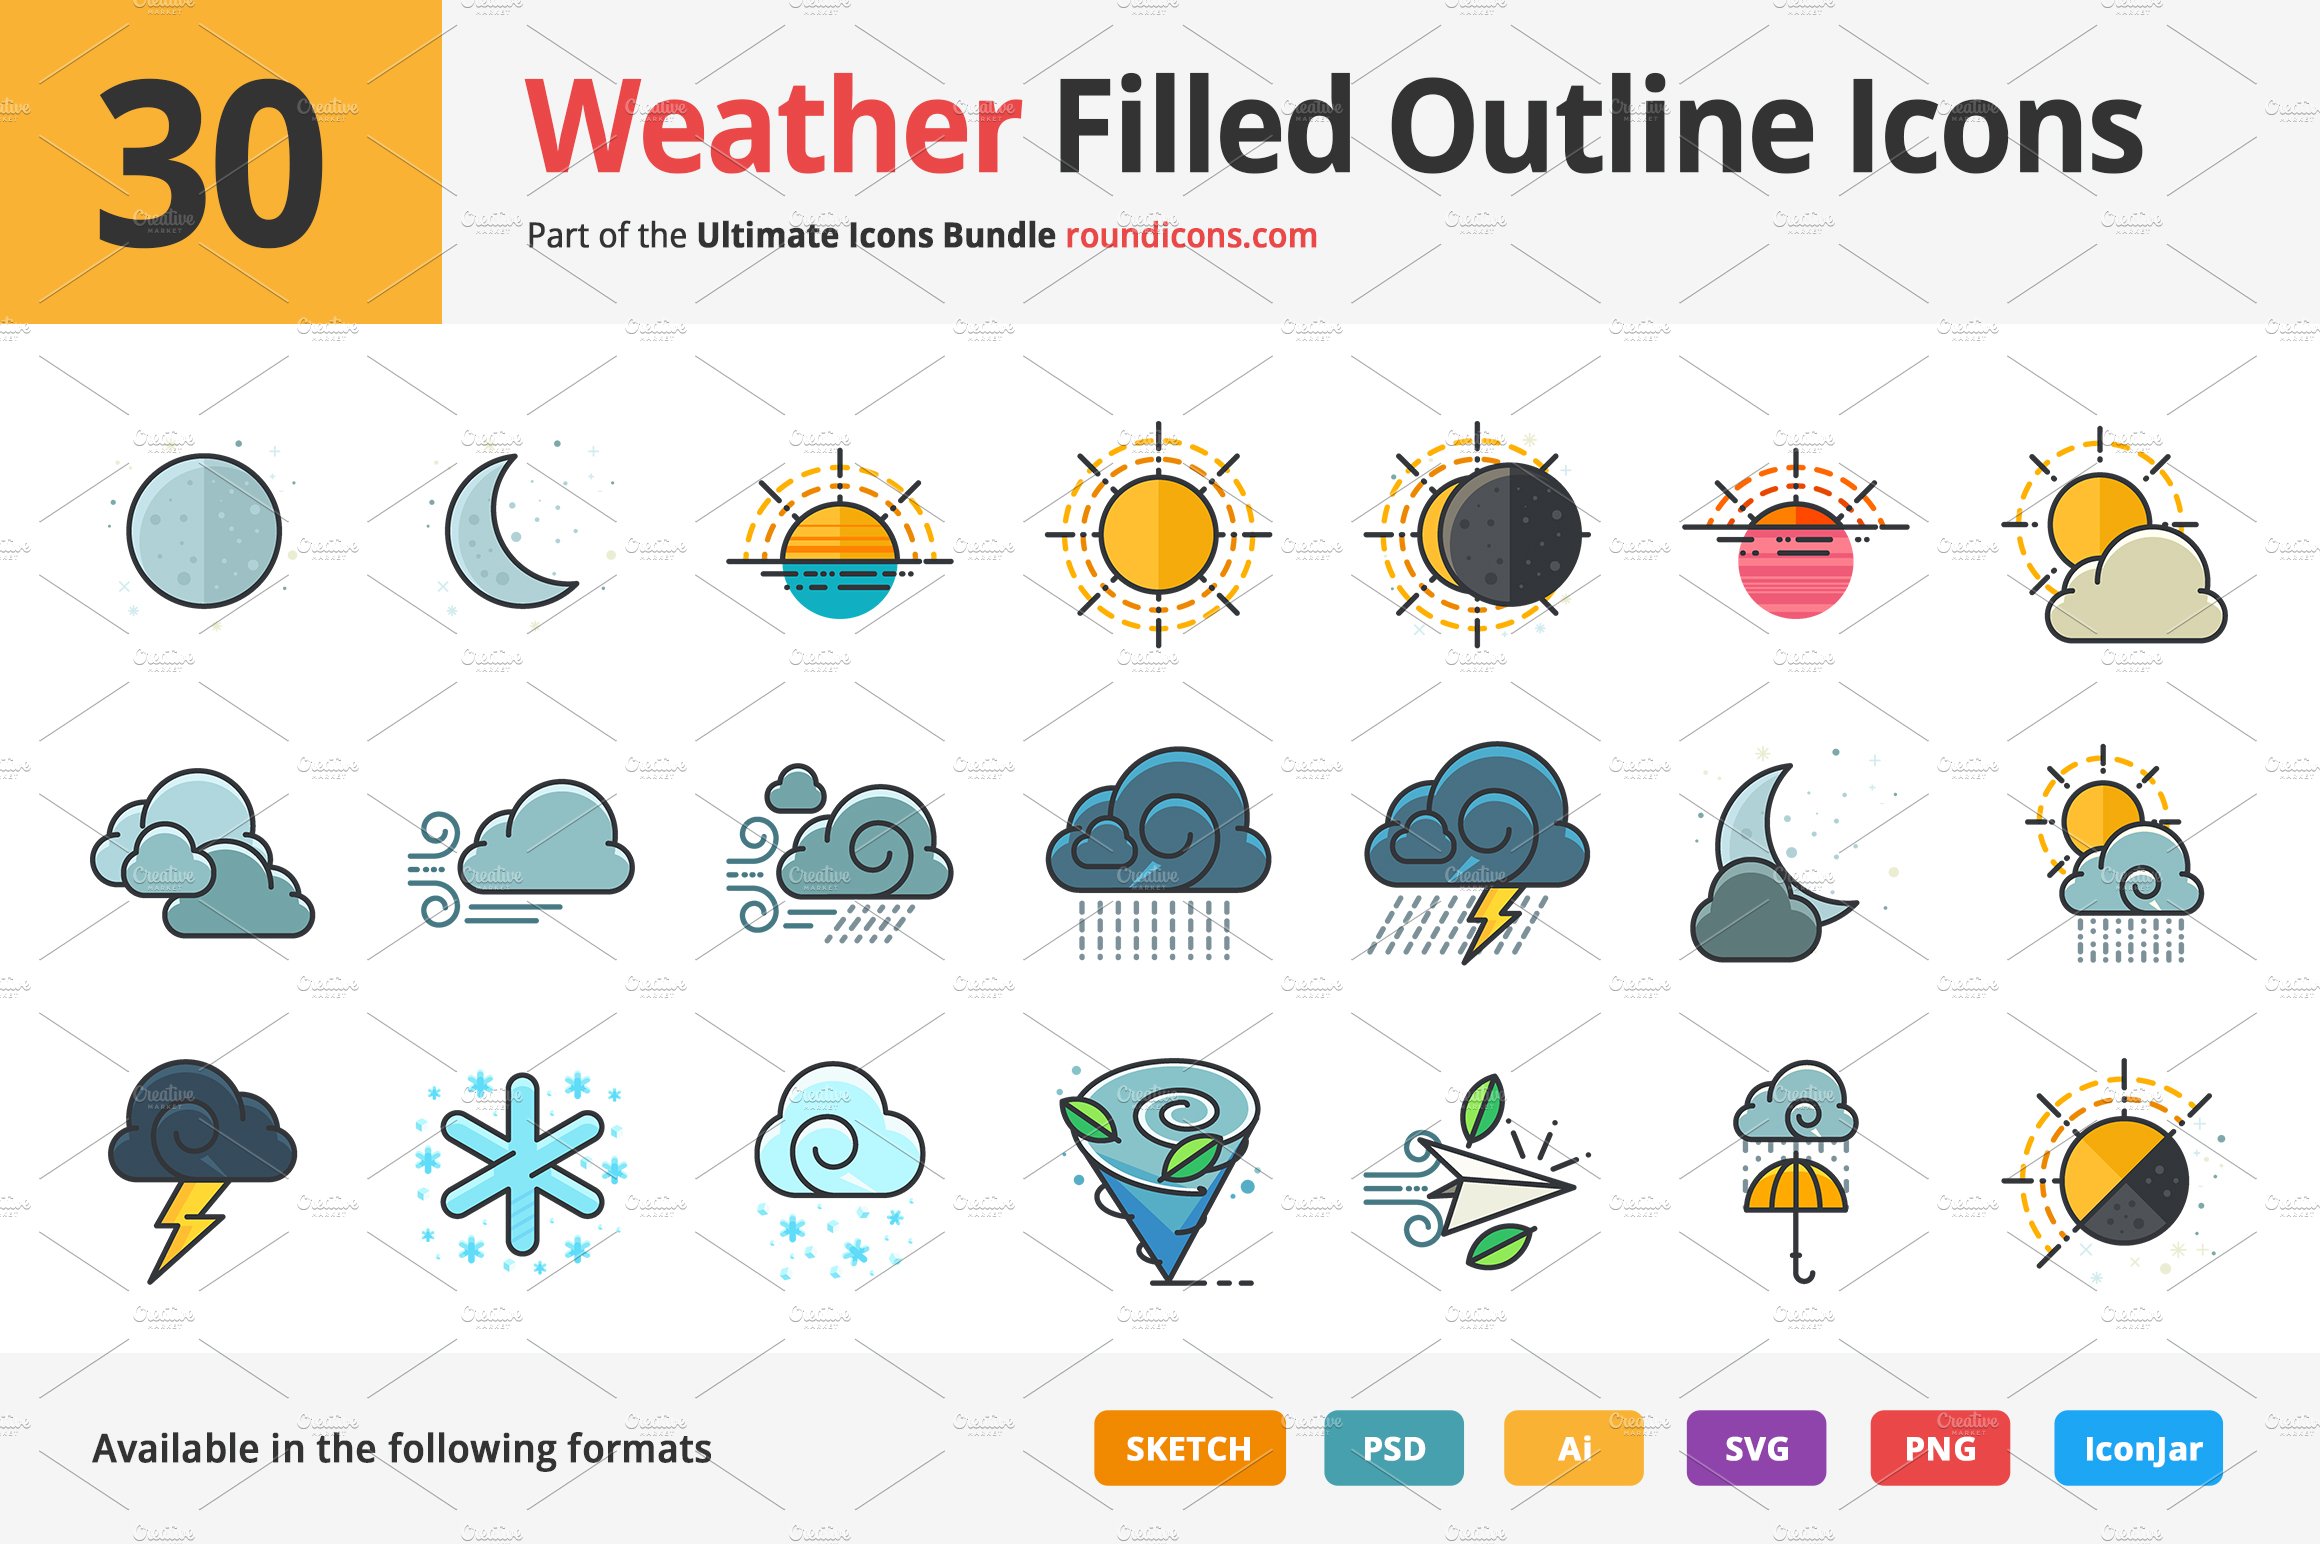 30 Weather Filled Outline Icons cover image.